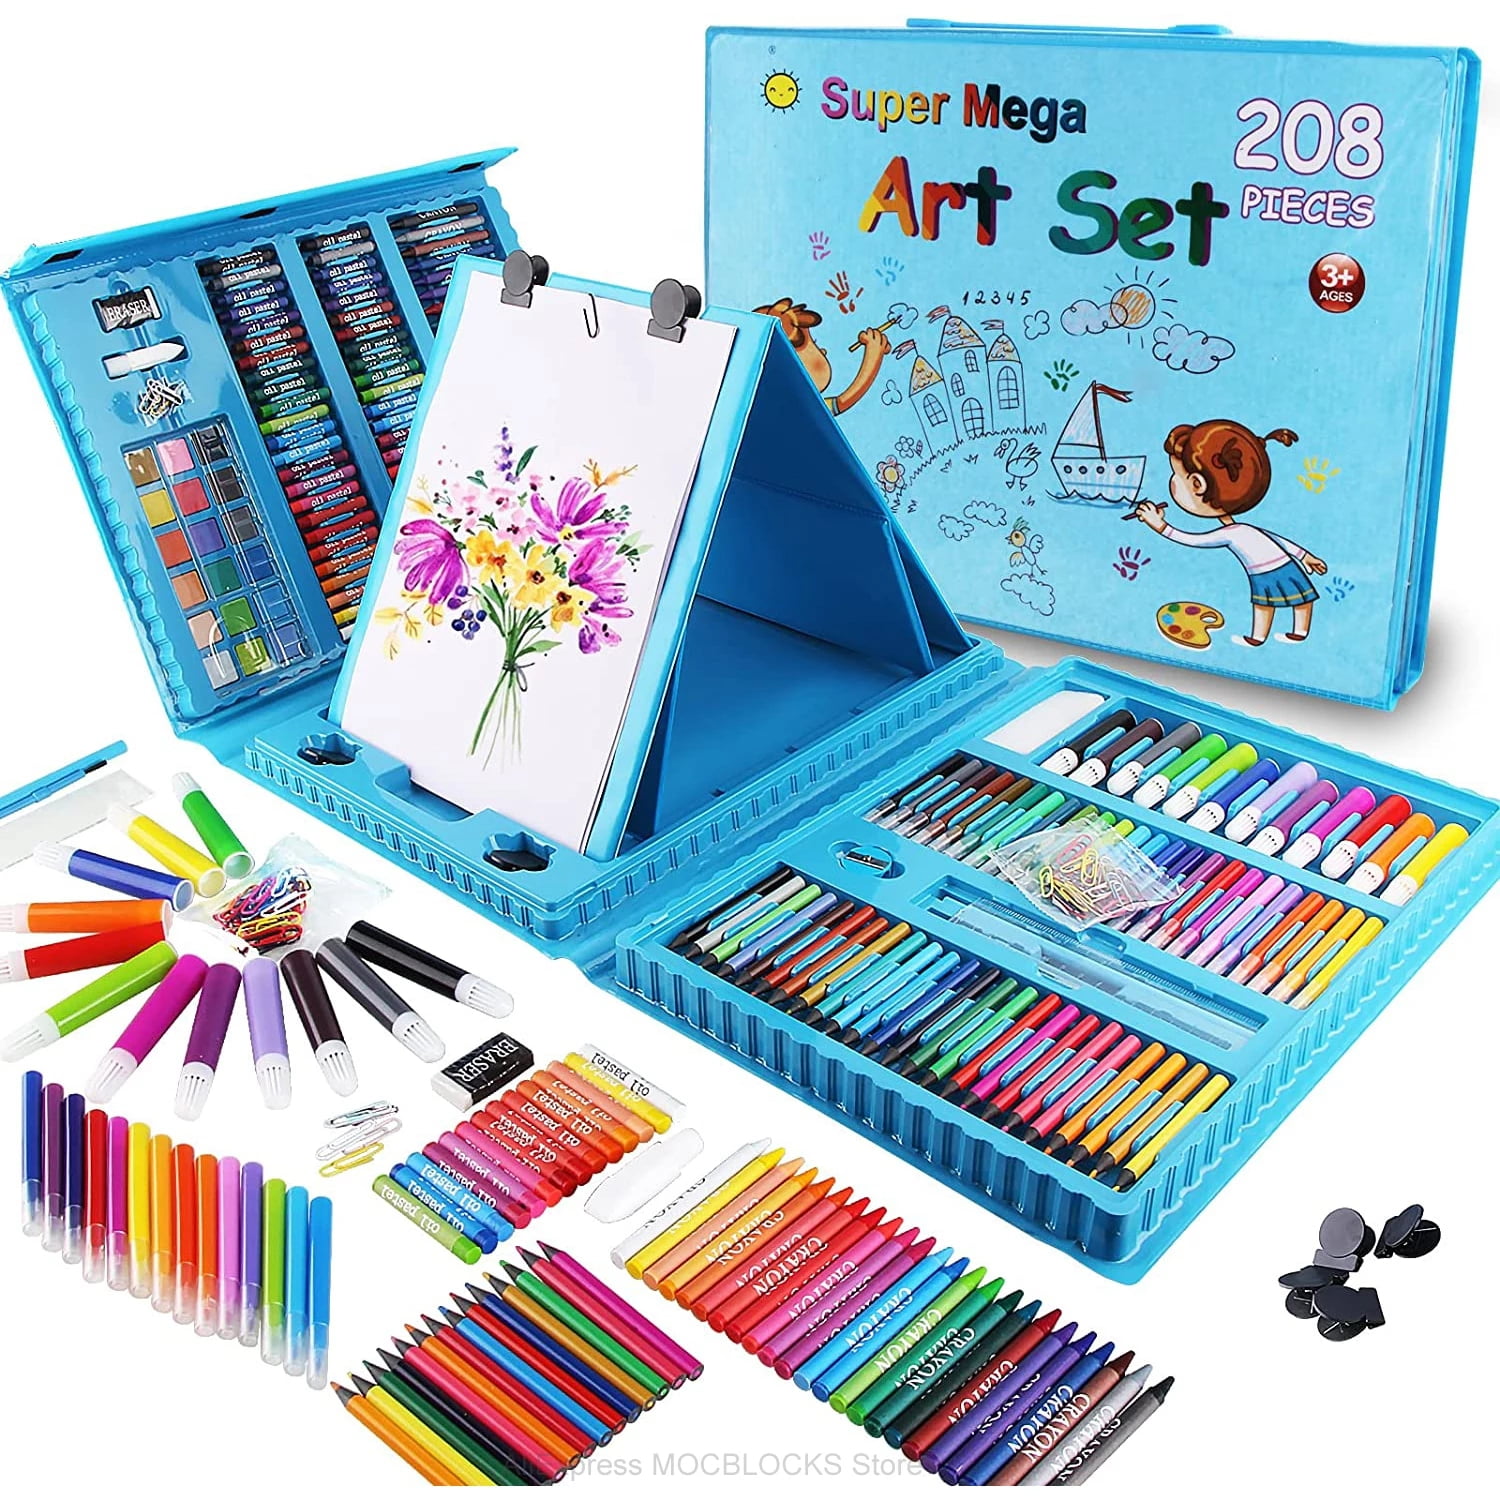 Generic Art Set Boys Girls Birthday Gifts Toys Kids Art Supplies Coloring  Case Kit Painting & Drawing Sets For Children 208 Pcs Blue